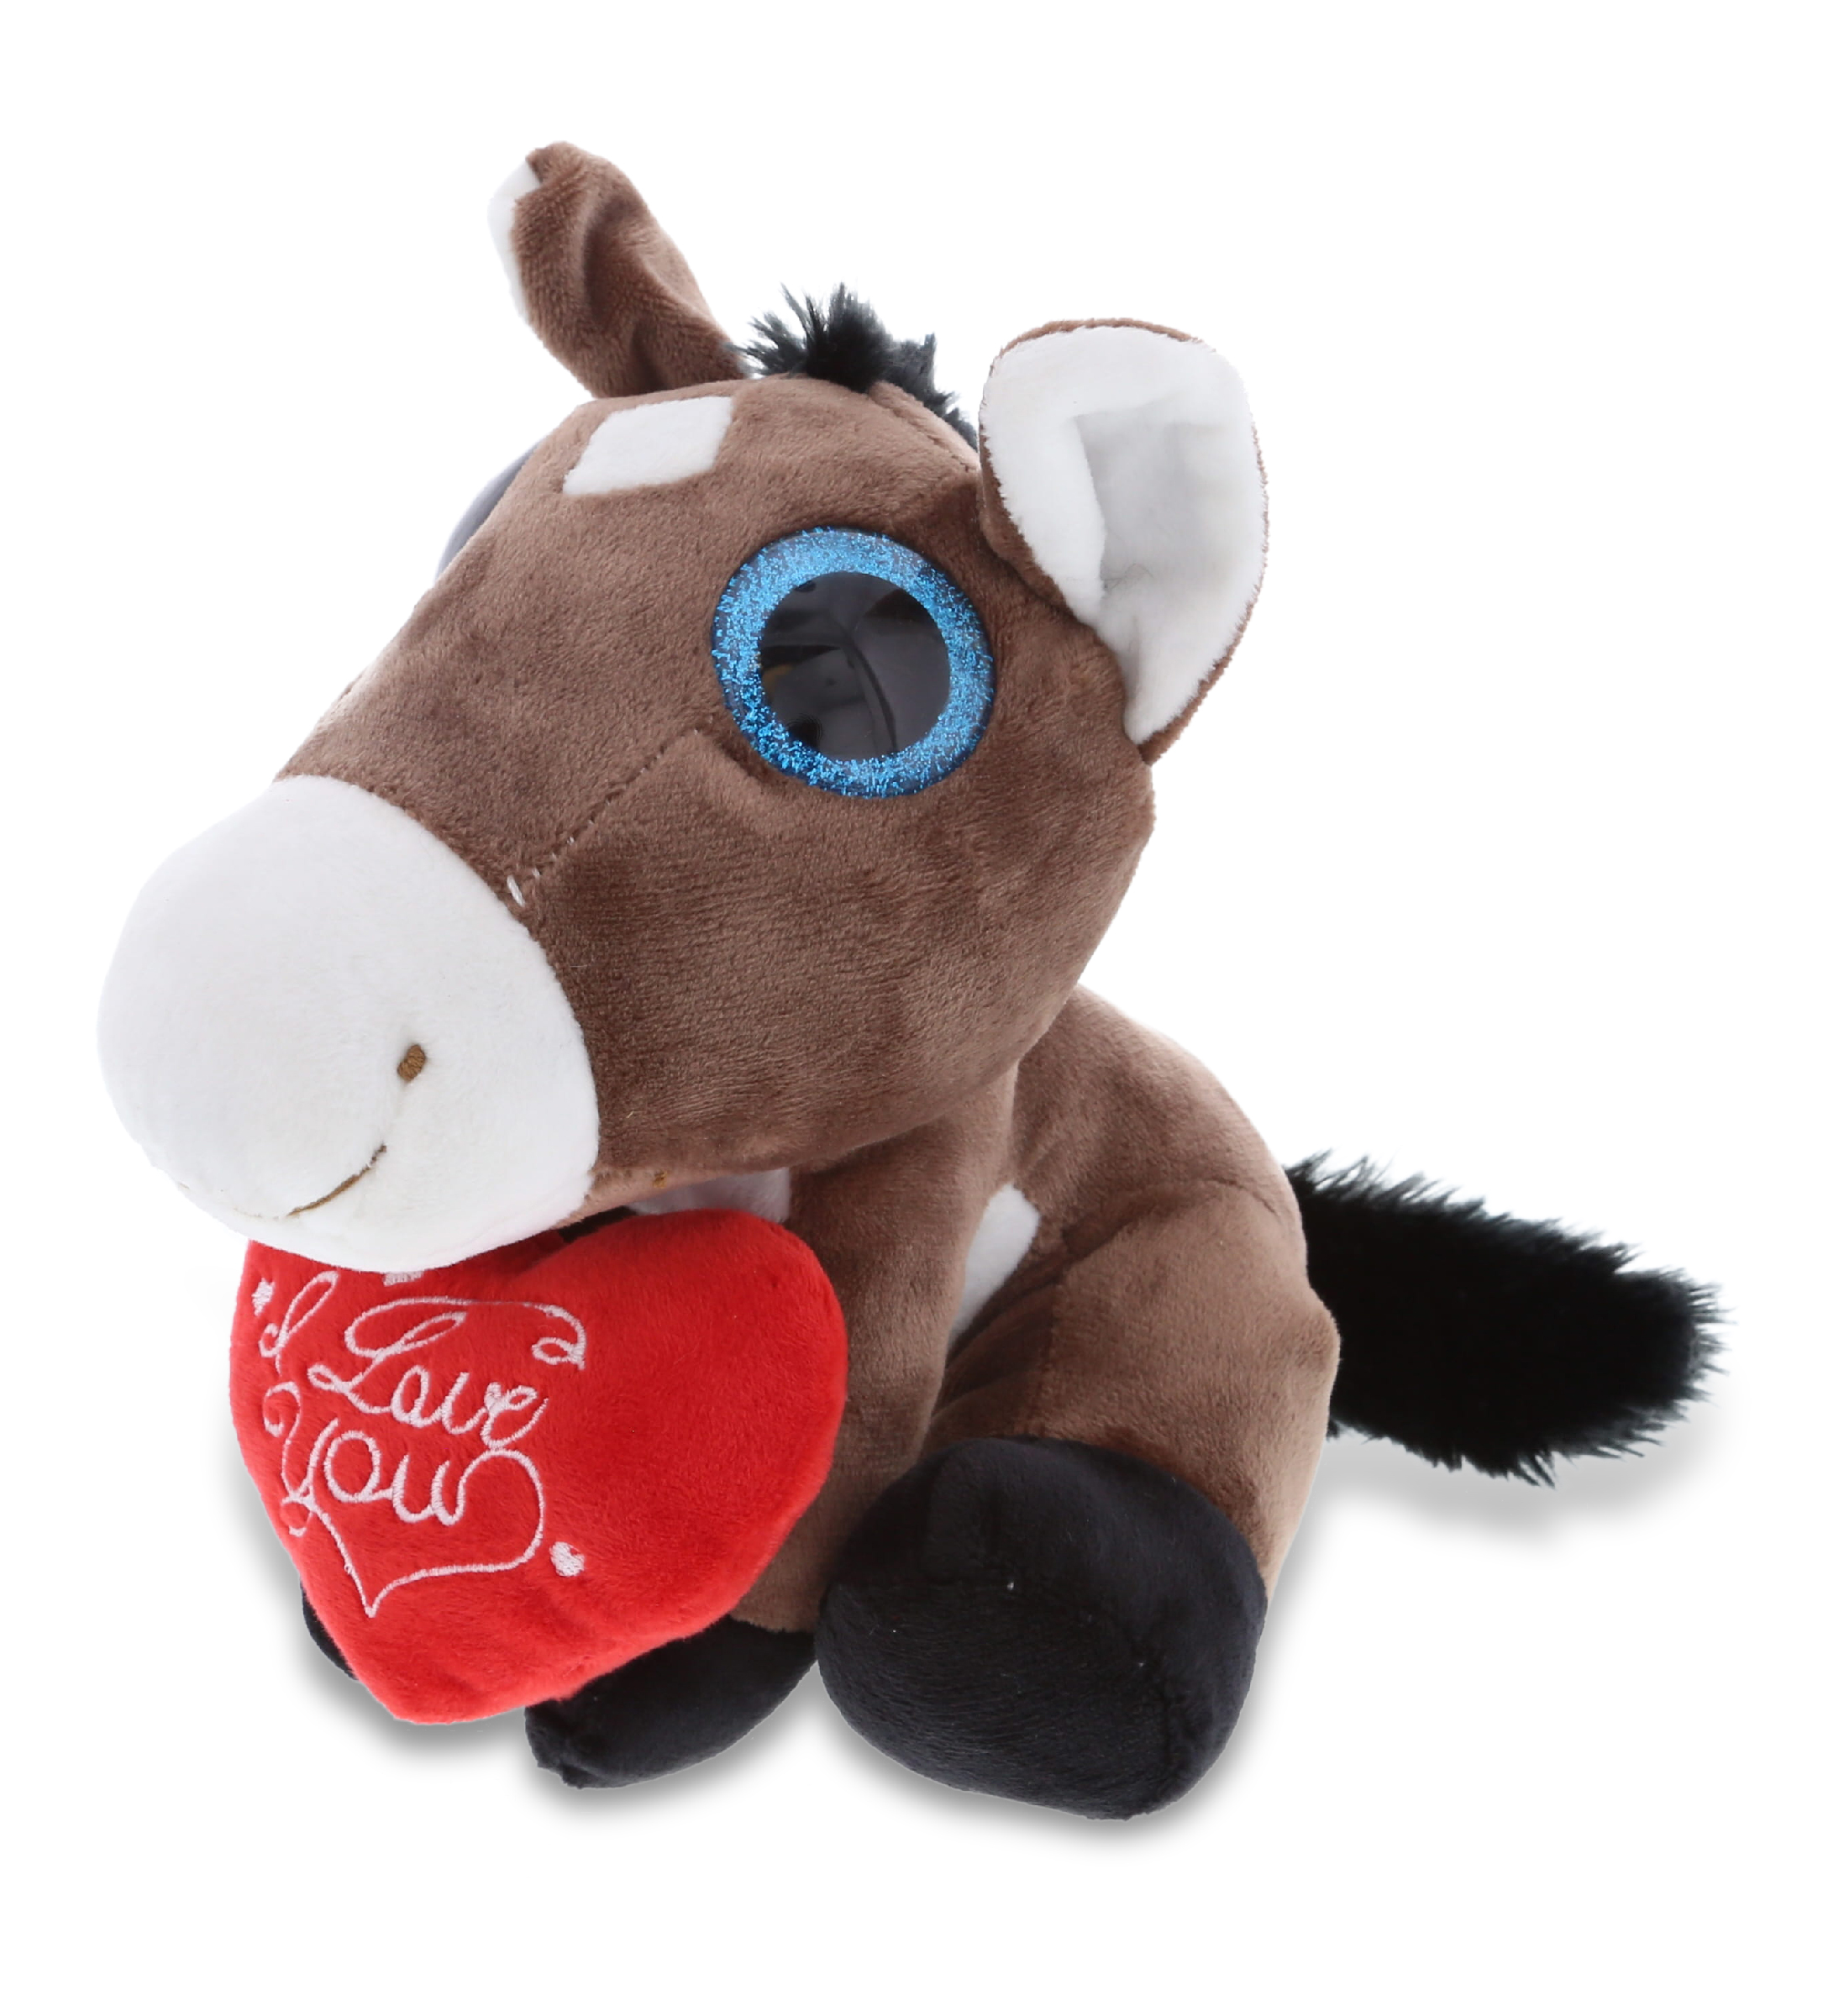 Cute Stuffed Animal With Heart And With Name Personalization For Valentine,  Anniversary, Romantic Date, Boyfriend, Or Girlfriend Gift – 8″ – Dollibu I  Love You Plush Sparkling Big Eye Horse - DolliBu